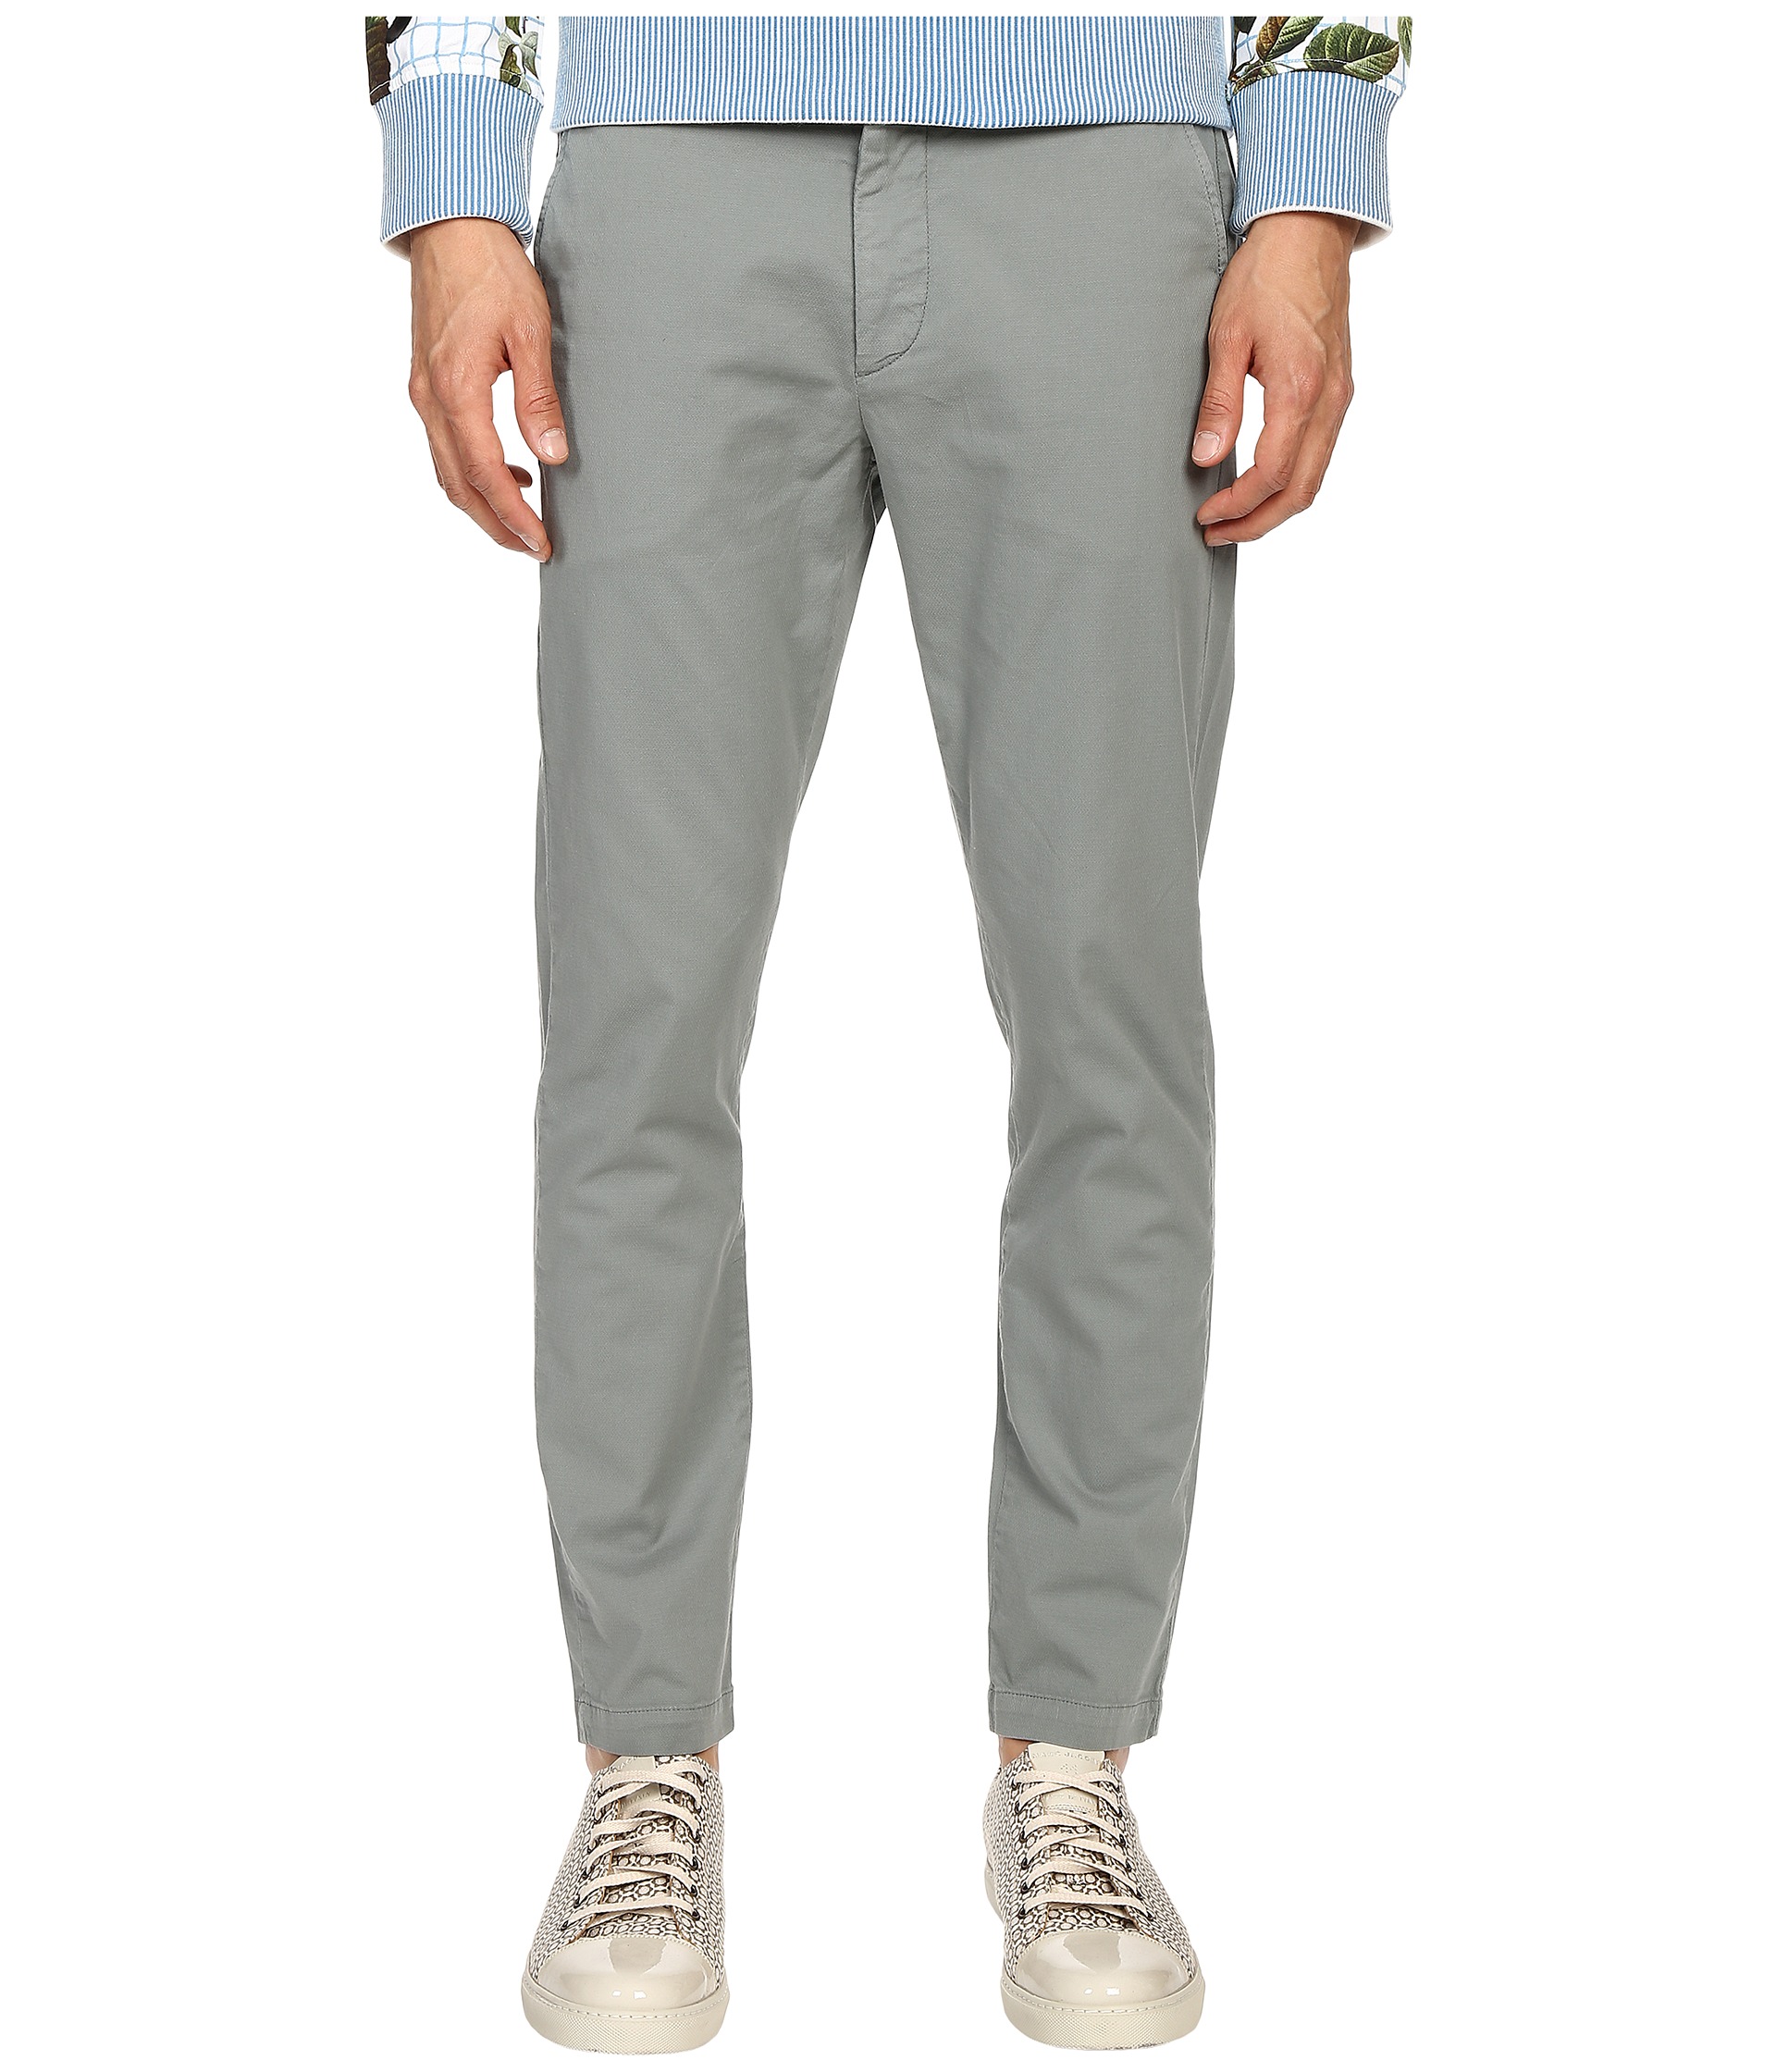 Vivienne Westwood Anglomania Classic Chino Pants